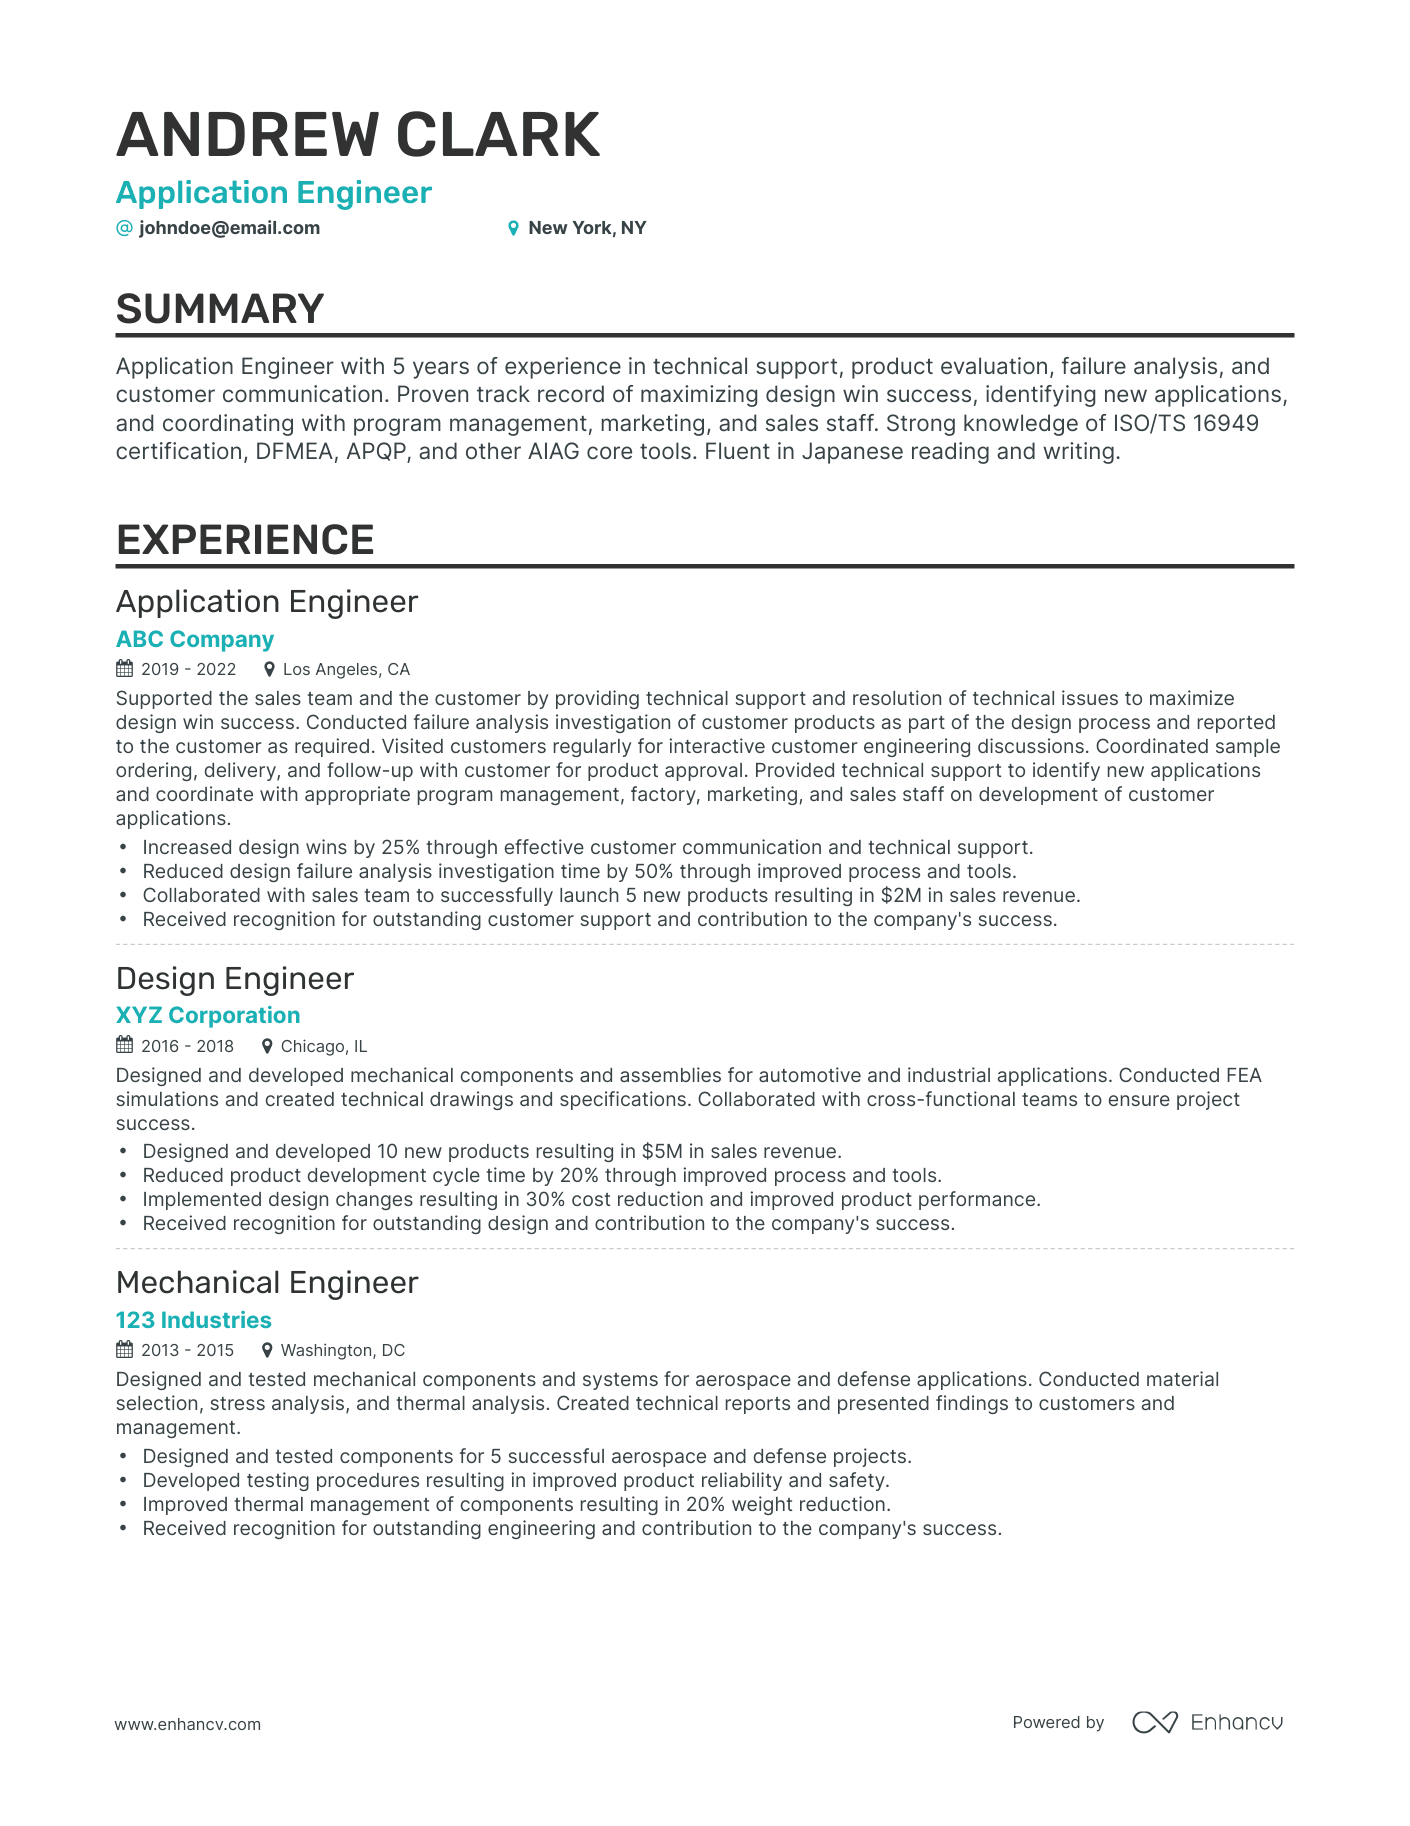 Classic Application Engineer Resume Template